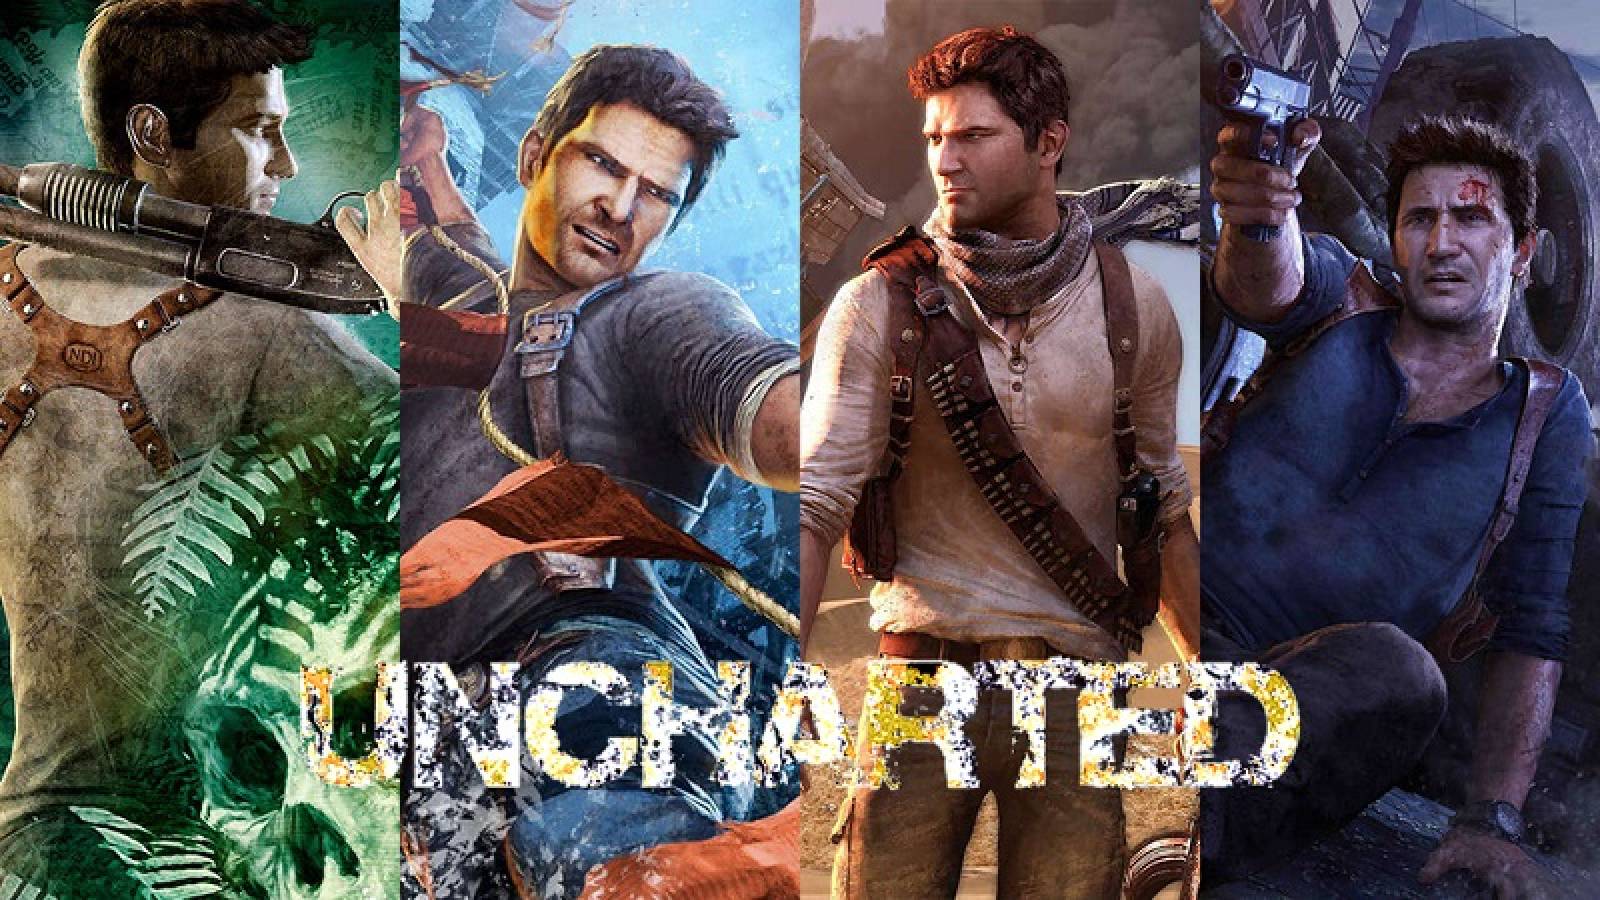 Things not to mention about Uncharted - The most famous game brand on PlayStation